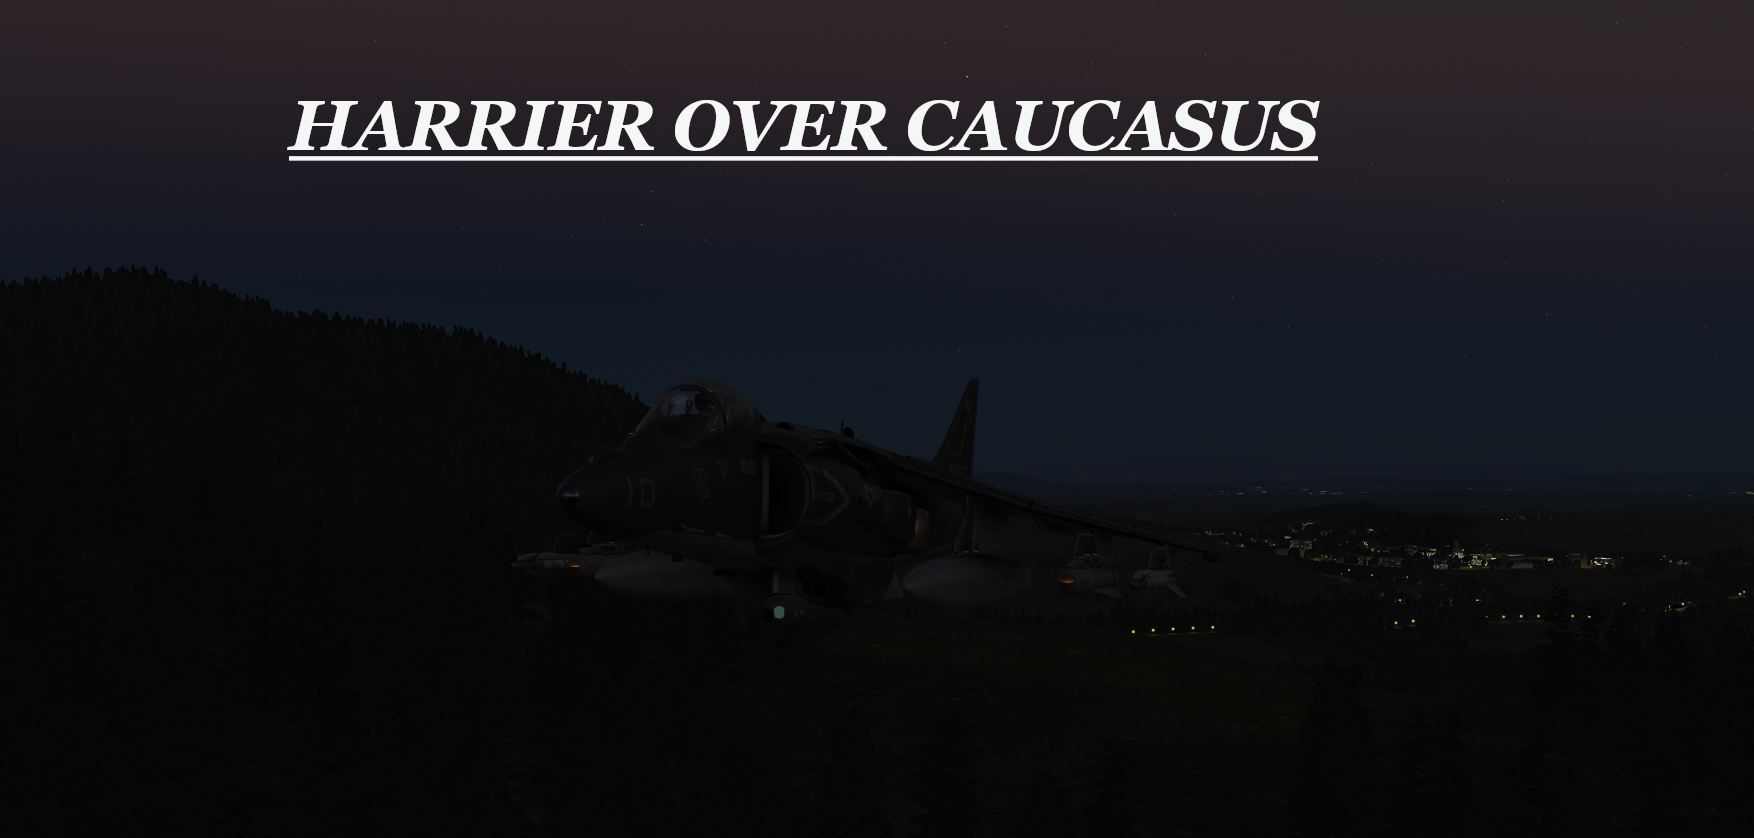 Harrier over Caucasus LHA using modified Mbot Dynamic Campaign Engine